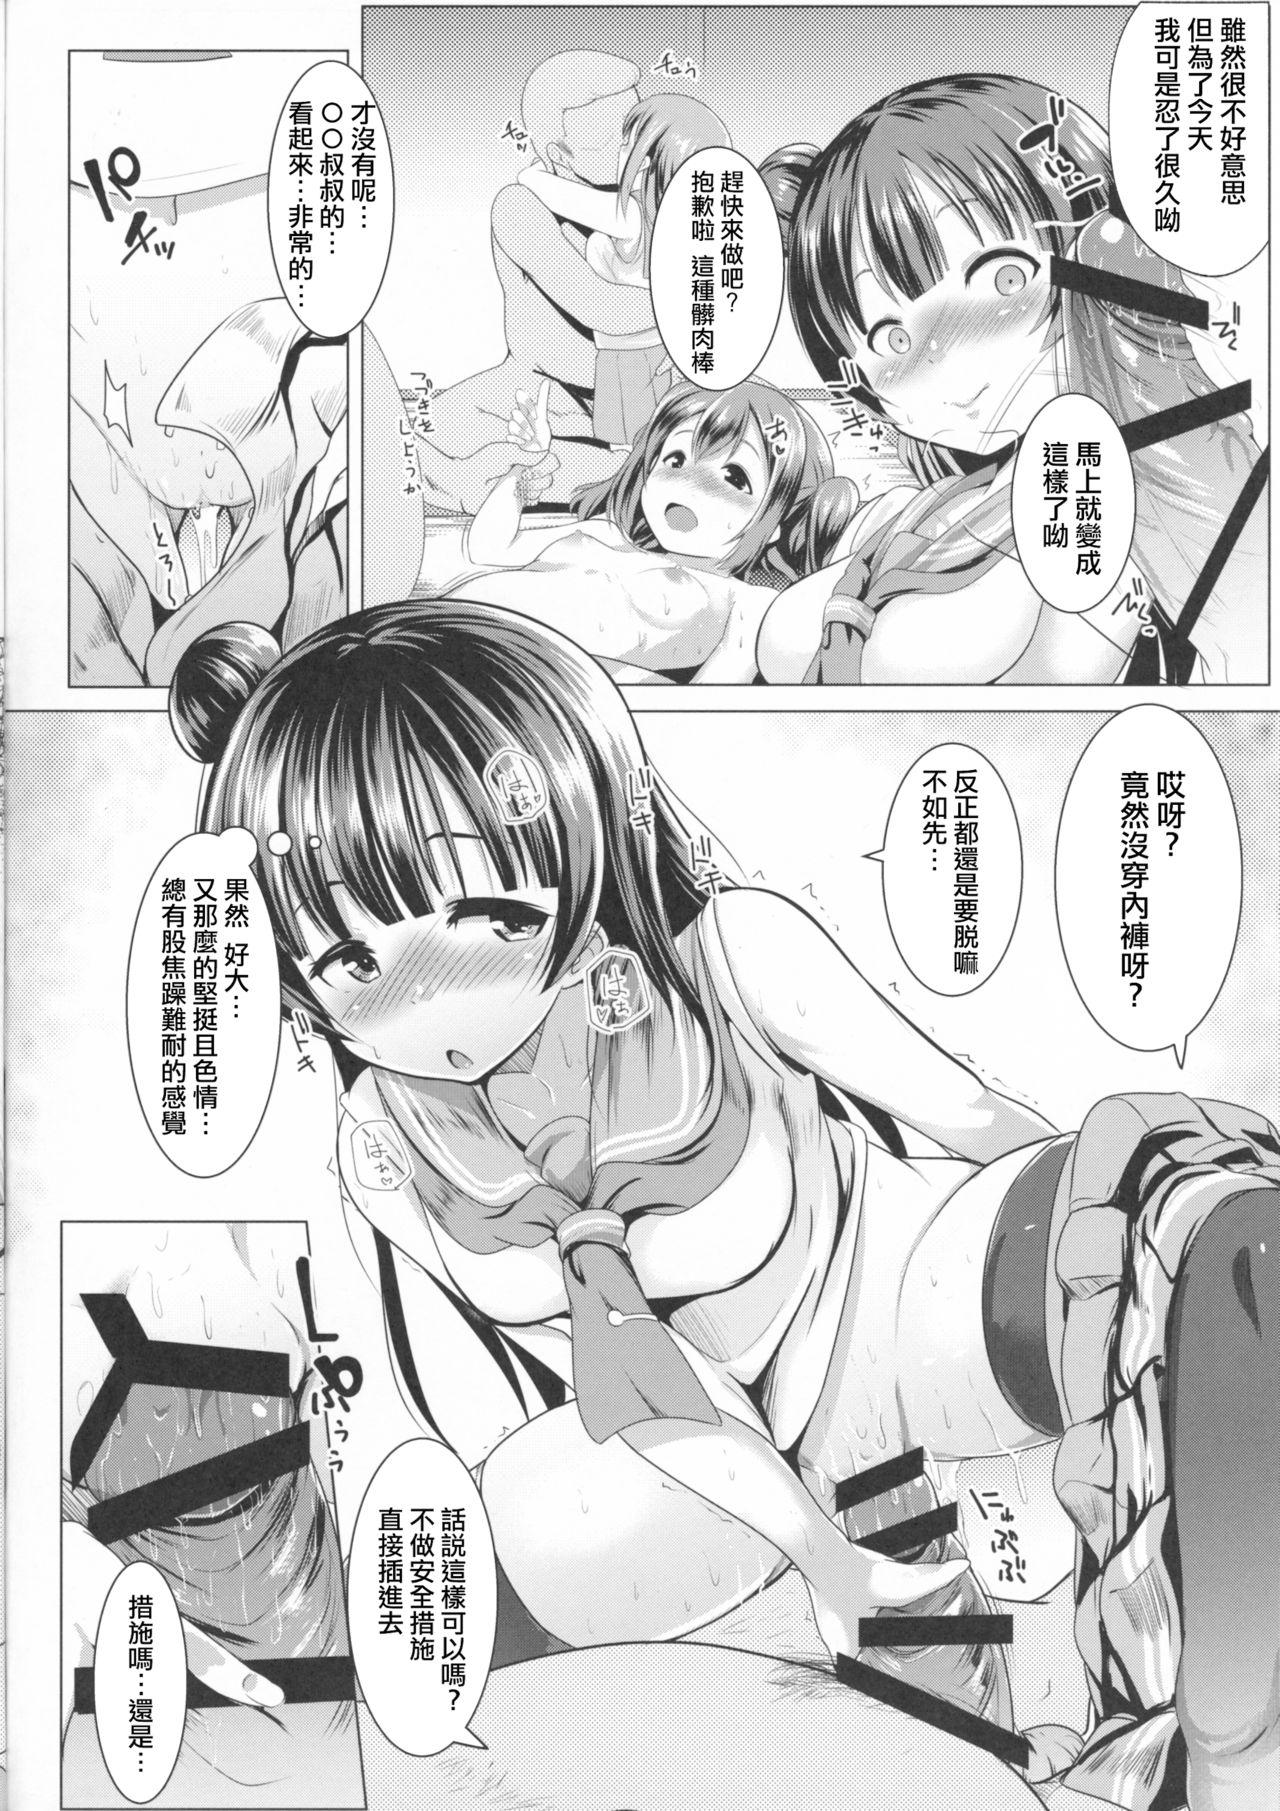 Anal Licking SUMMER PROMISCUITY with Yoshimaruby - Love live sunshine Stretch - Page 7